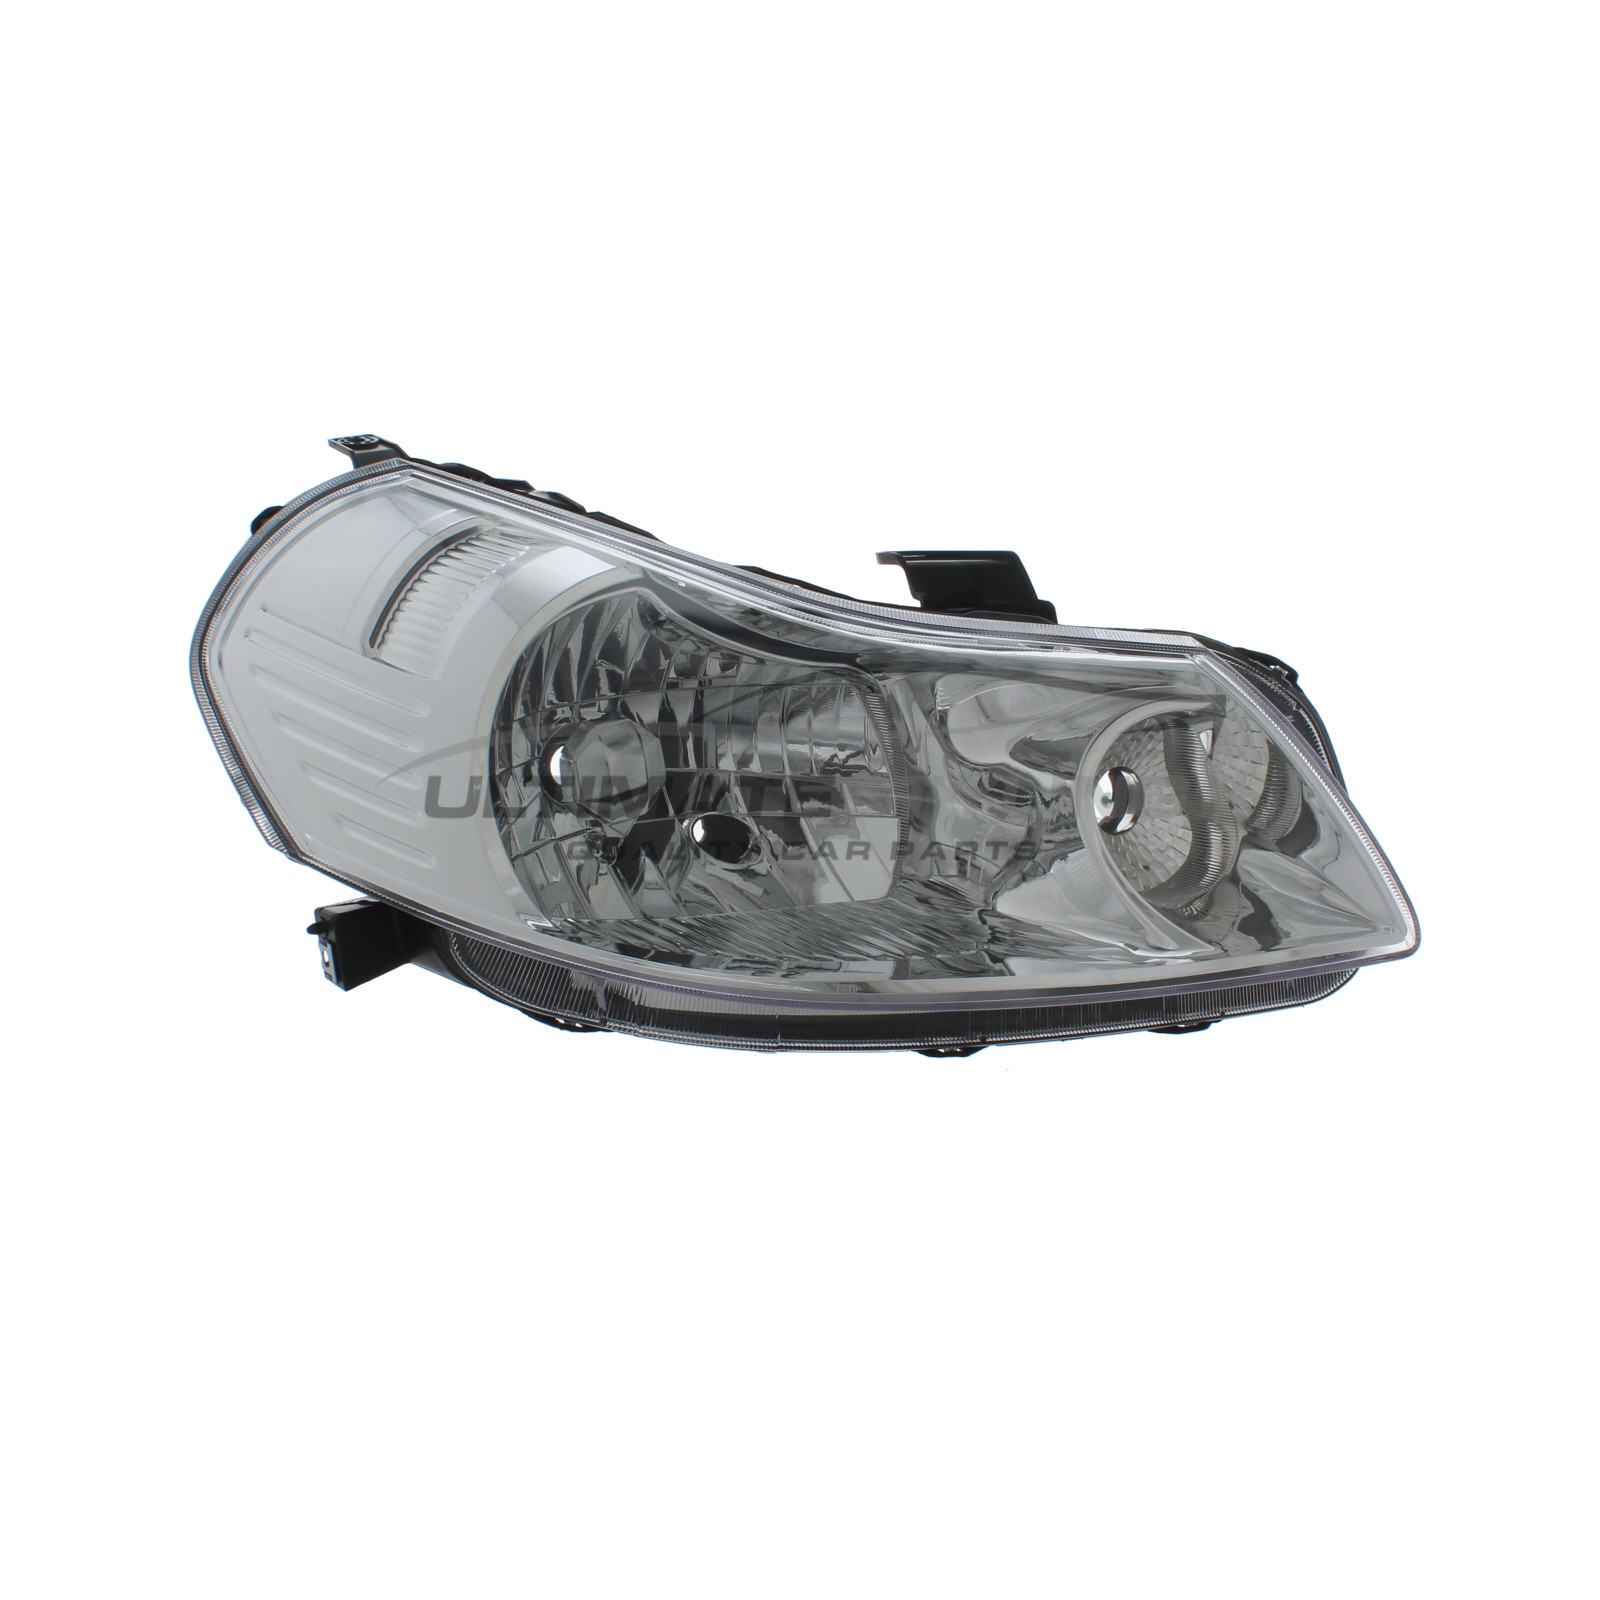 Suzuki SX4 2006-2015 Halogen, Electric Without Motor, Chrome Headlight / Headlamp Including Clear Indicator Drivers Side (RH)